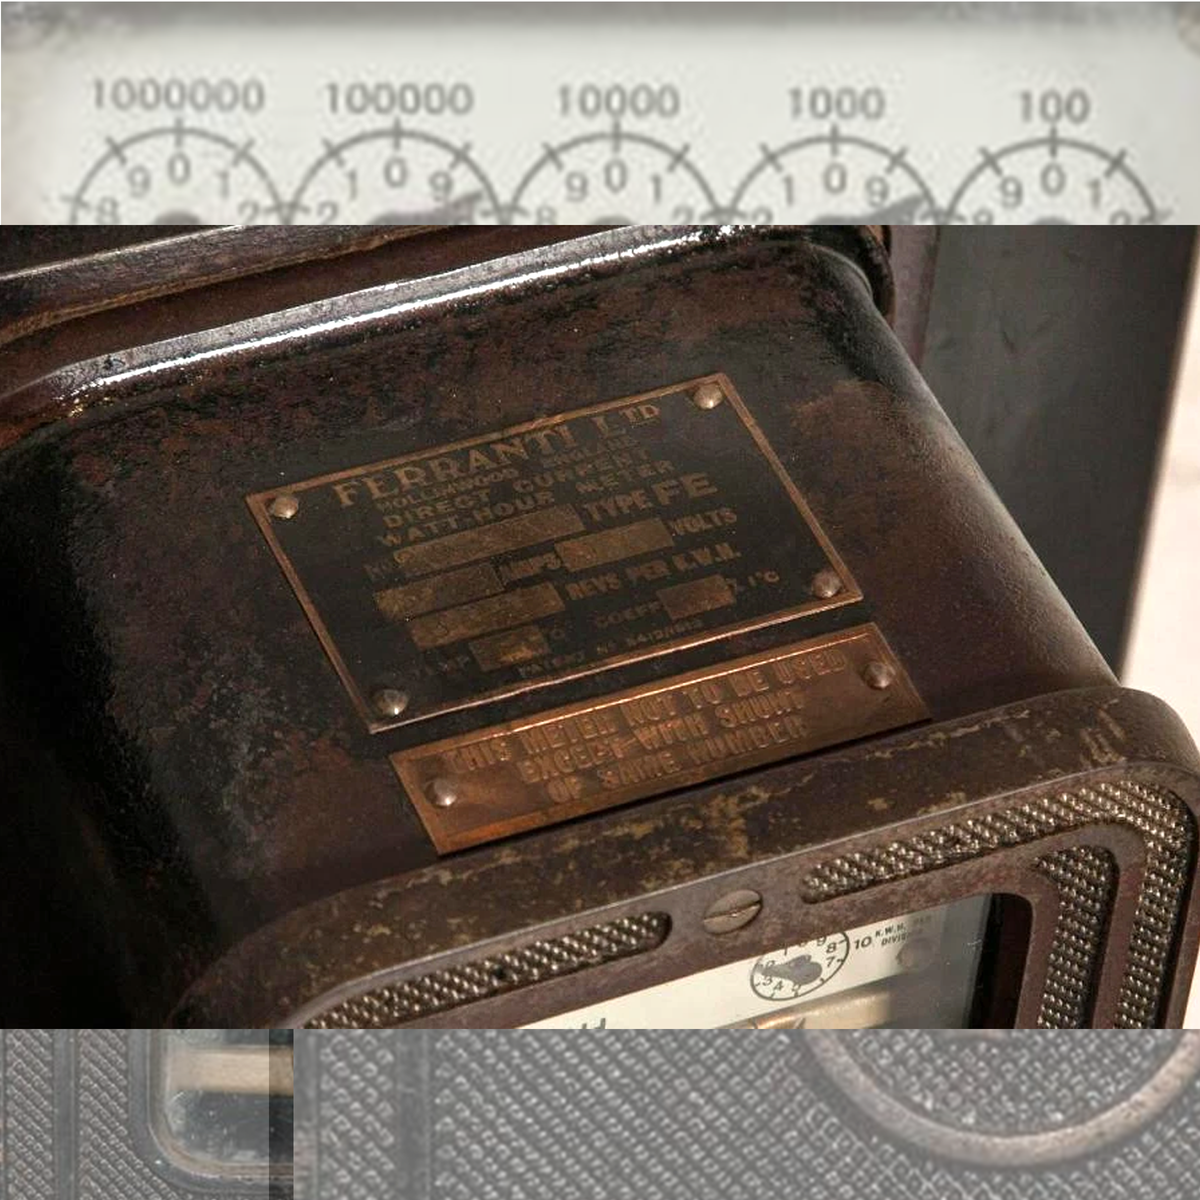 Vintage Ferranti Electric Meter from Pinewood Studios Power Station | The Architectural Forum